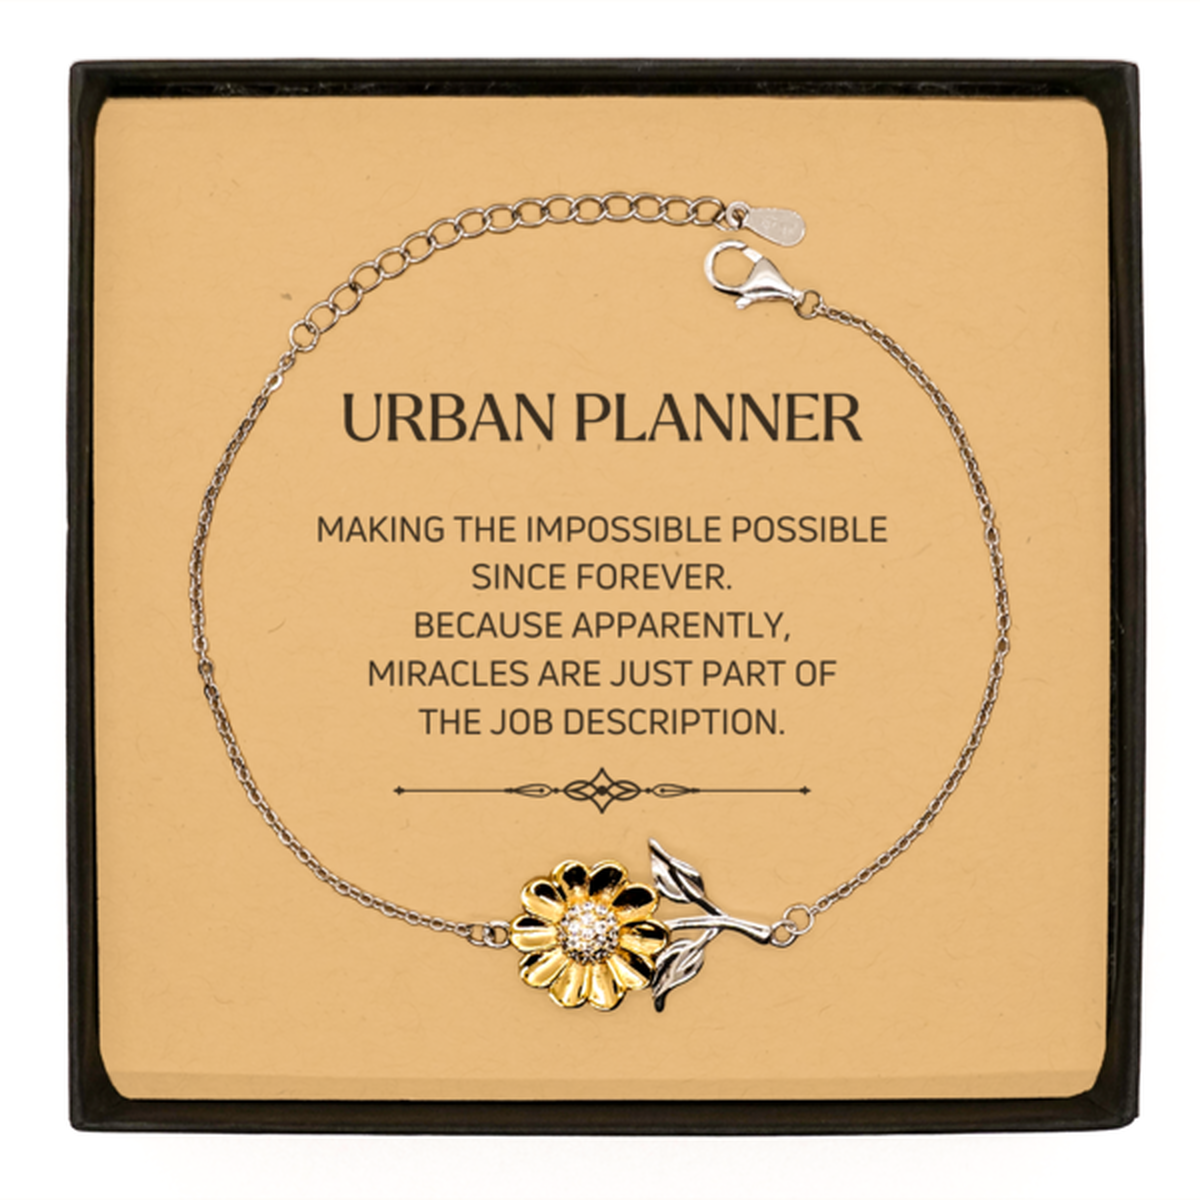 Funny Urban Planner Gifts, Miracles are just part of the job description, Inspirational Birthday Sunflower Bracelet For Urban Planner, Men, Women, Coworkers, Friends, Boss